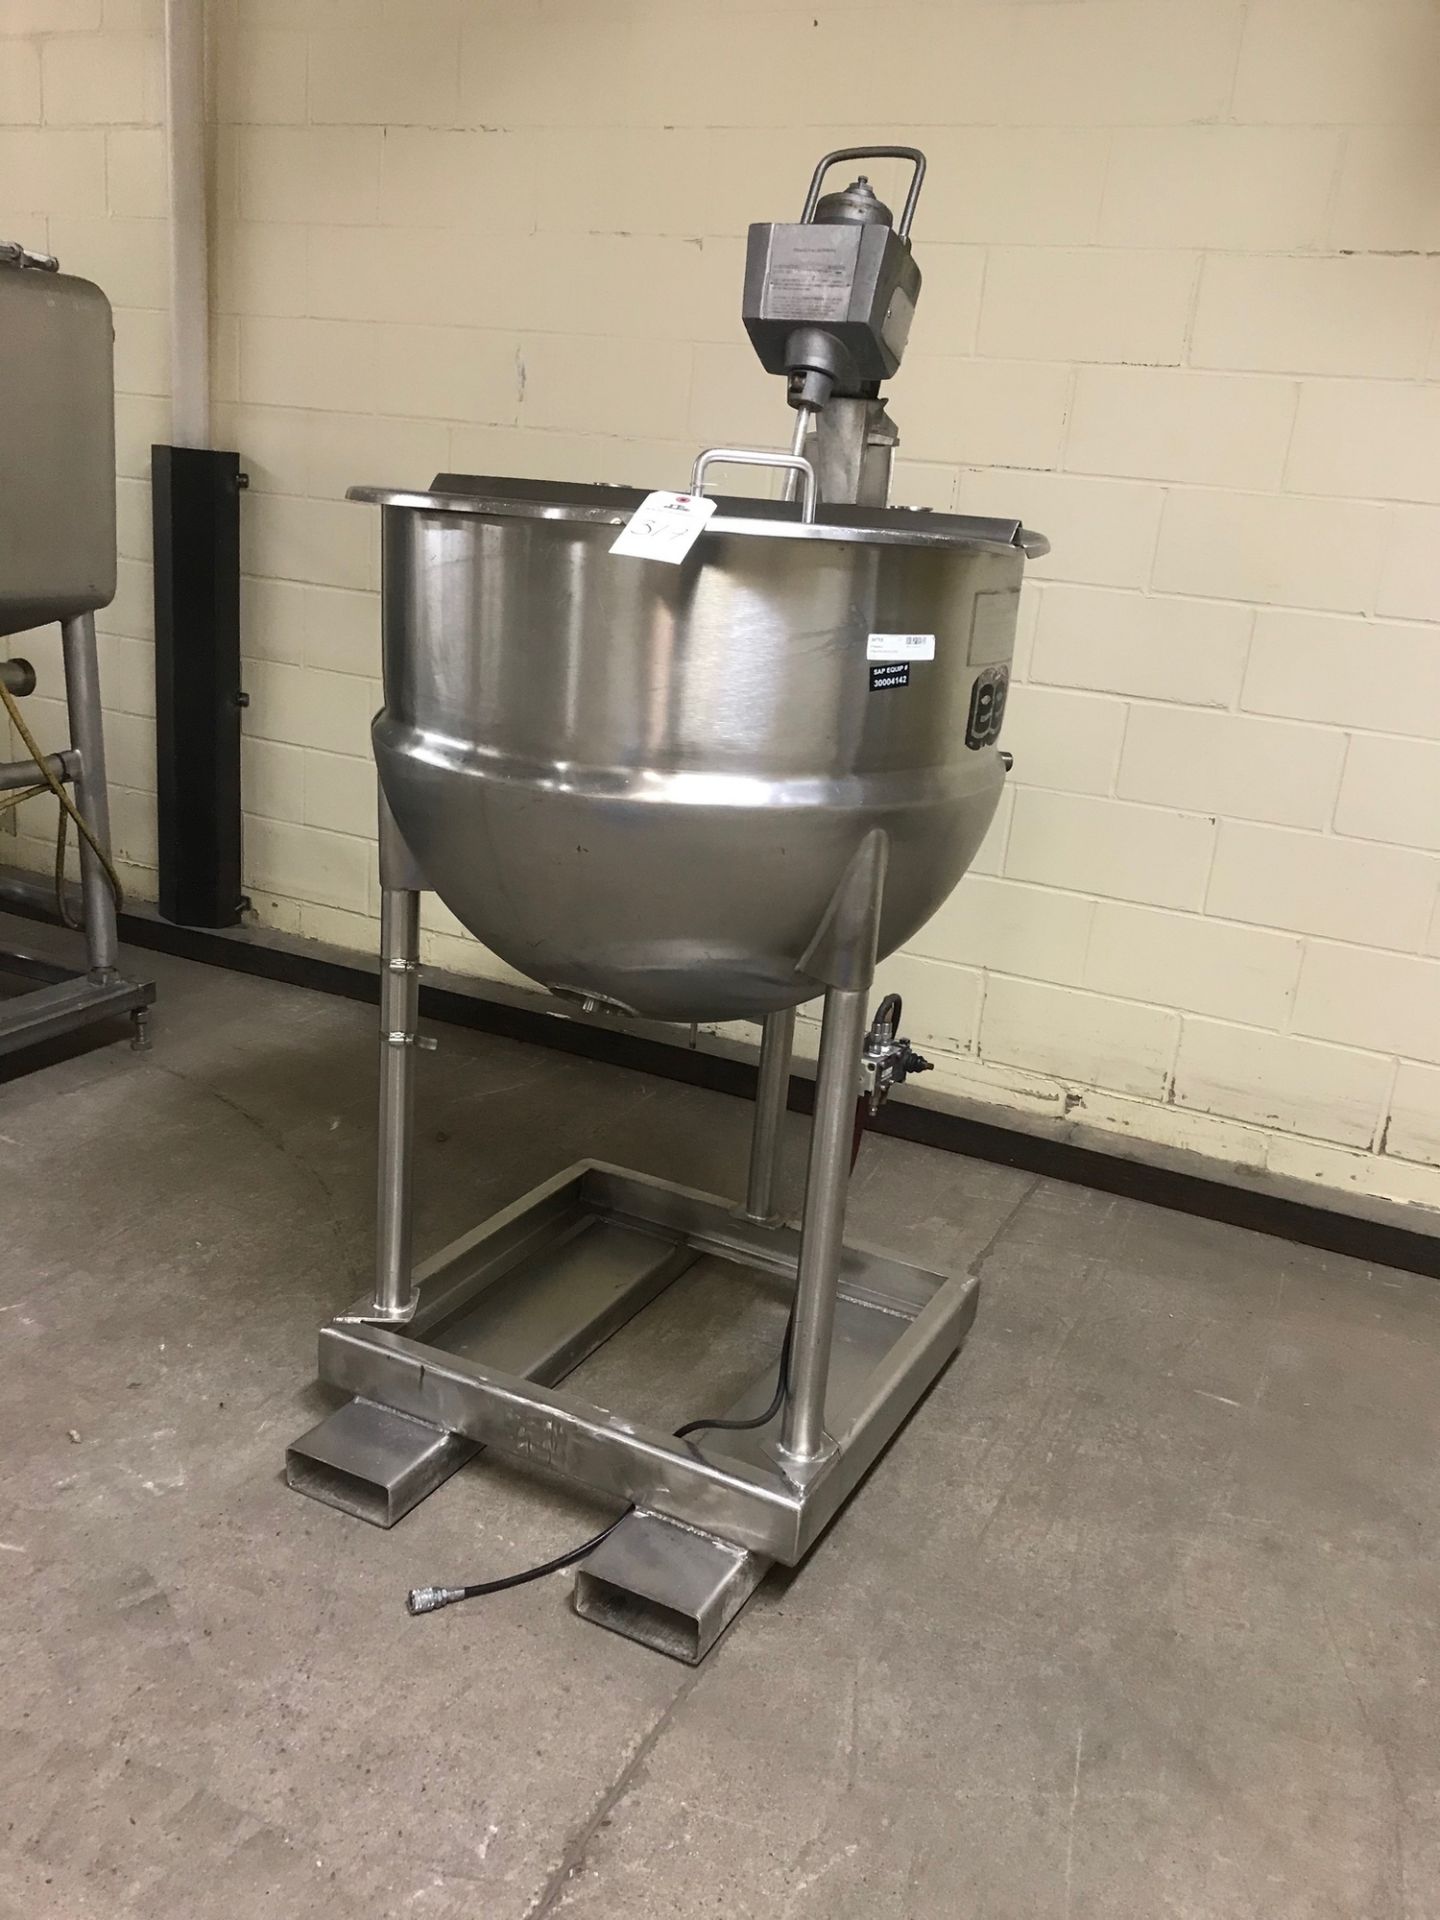 Lee Industries 50D, 316 Stainless Steel Steam Jacketed Kettle, 50 Gallon, S/N C2754A